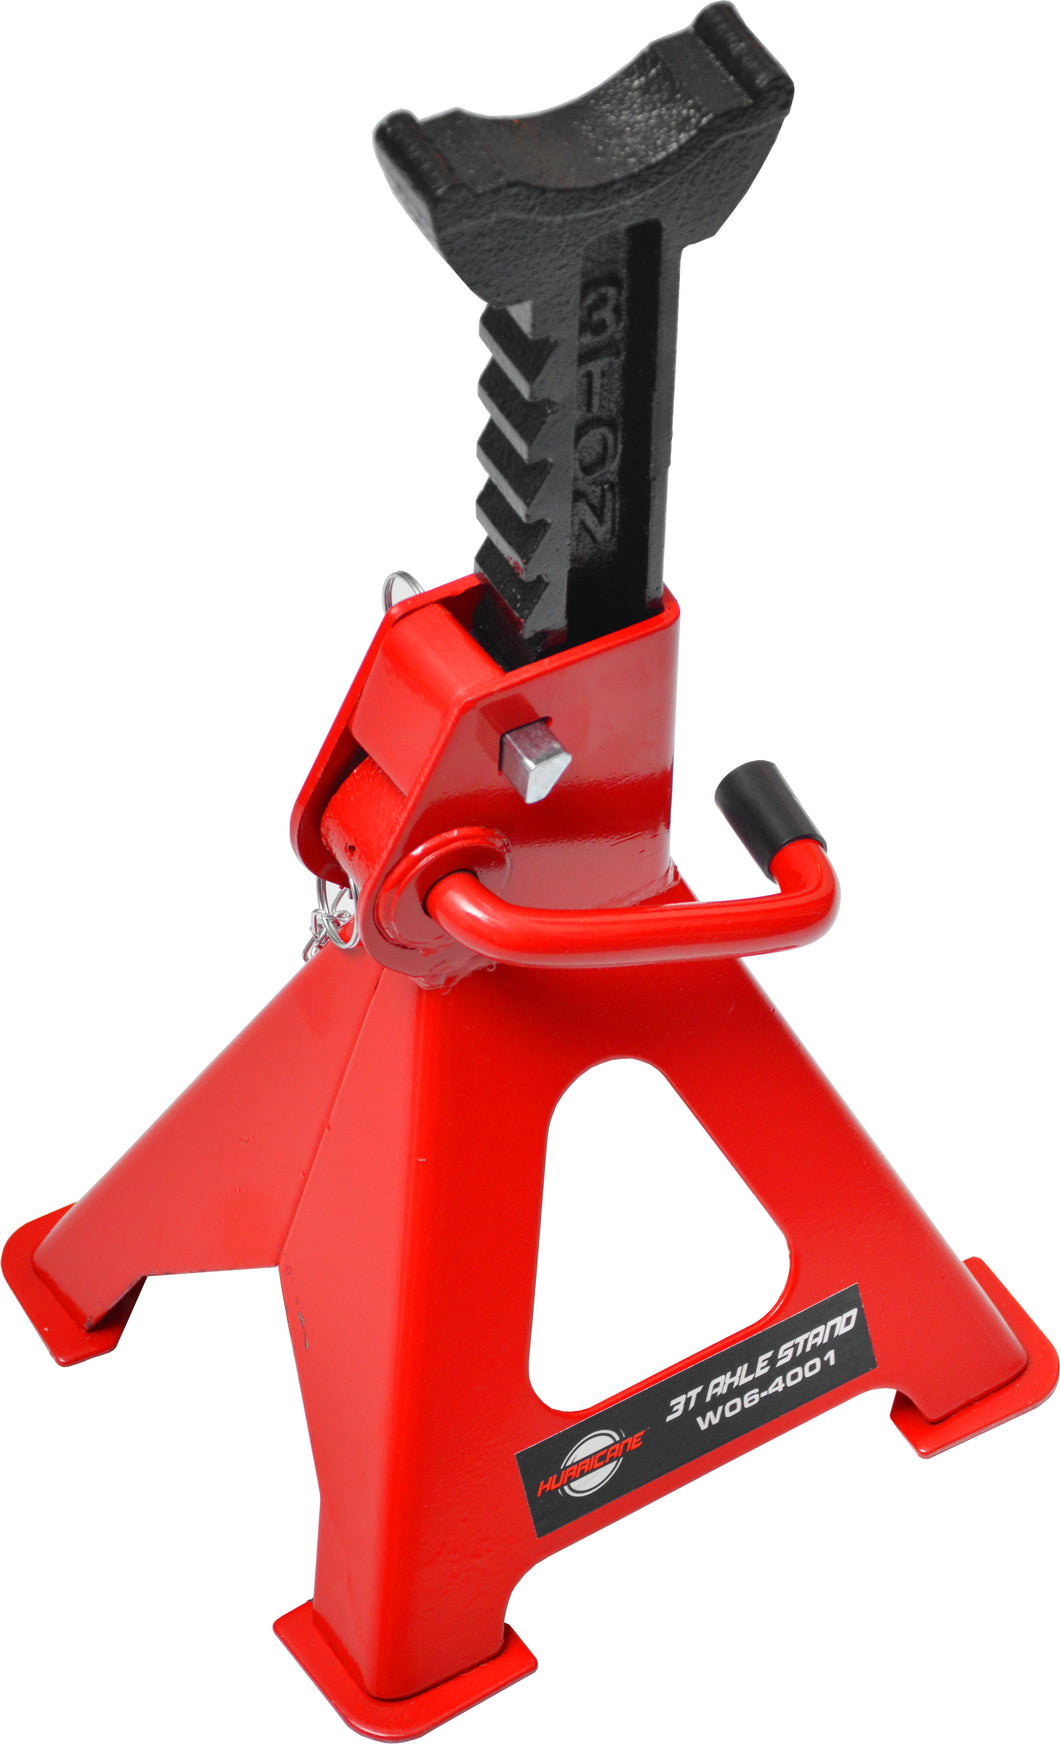 HURRICANE 3T Locking Axle Stands with Extra Pin - Pair